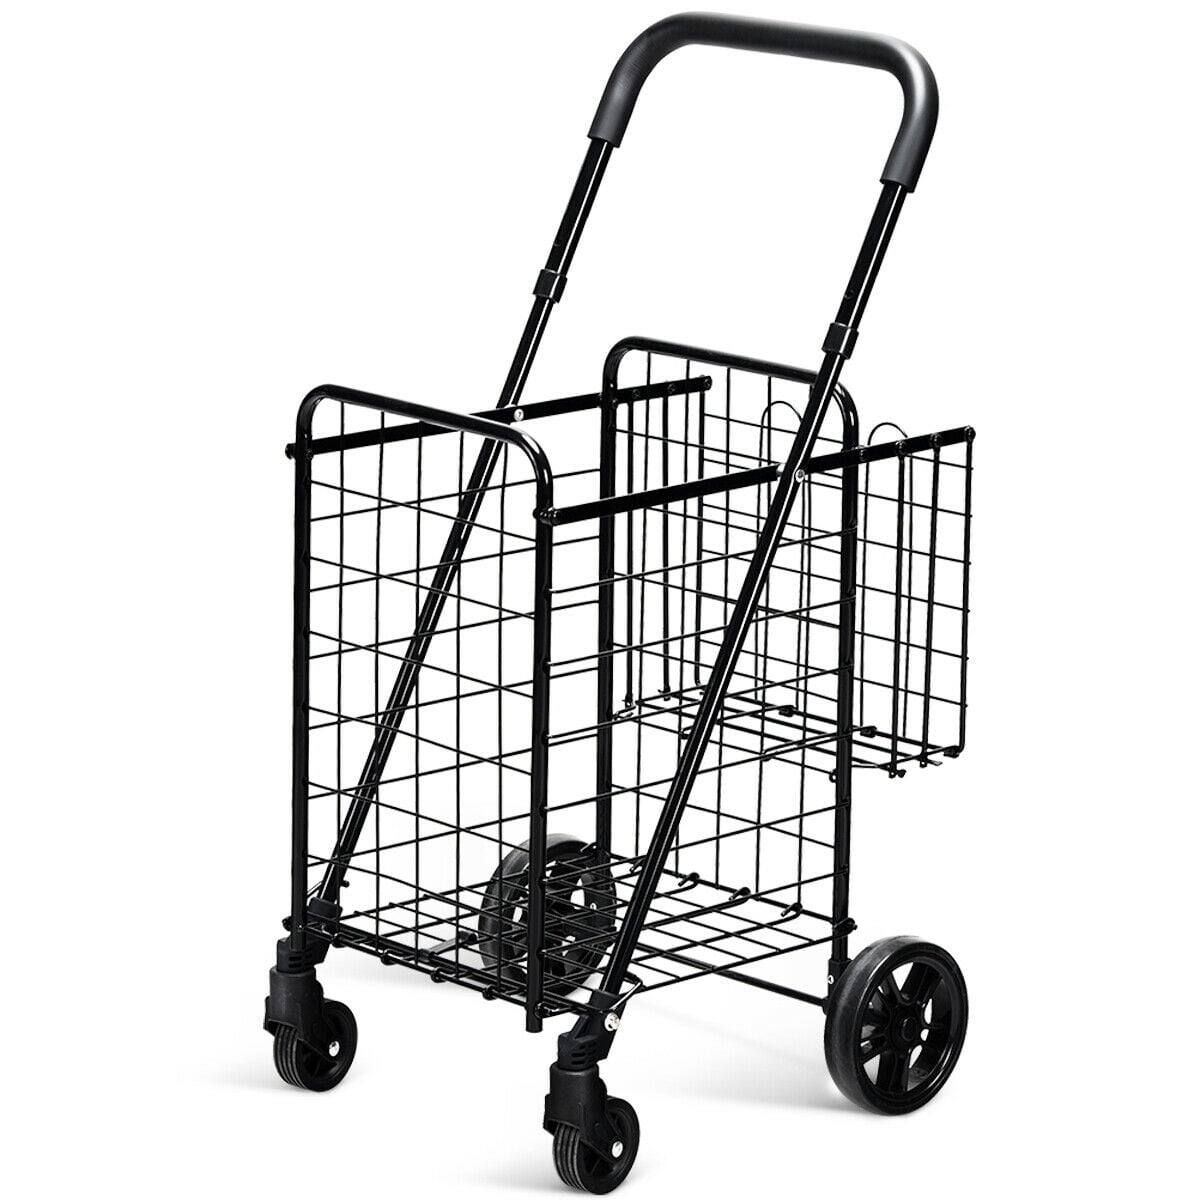 Details about   Costway Foldable Utility Cart Telescoping Handle Trolley Travel Shopping Black 